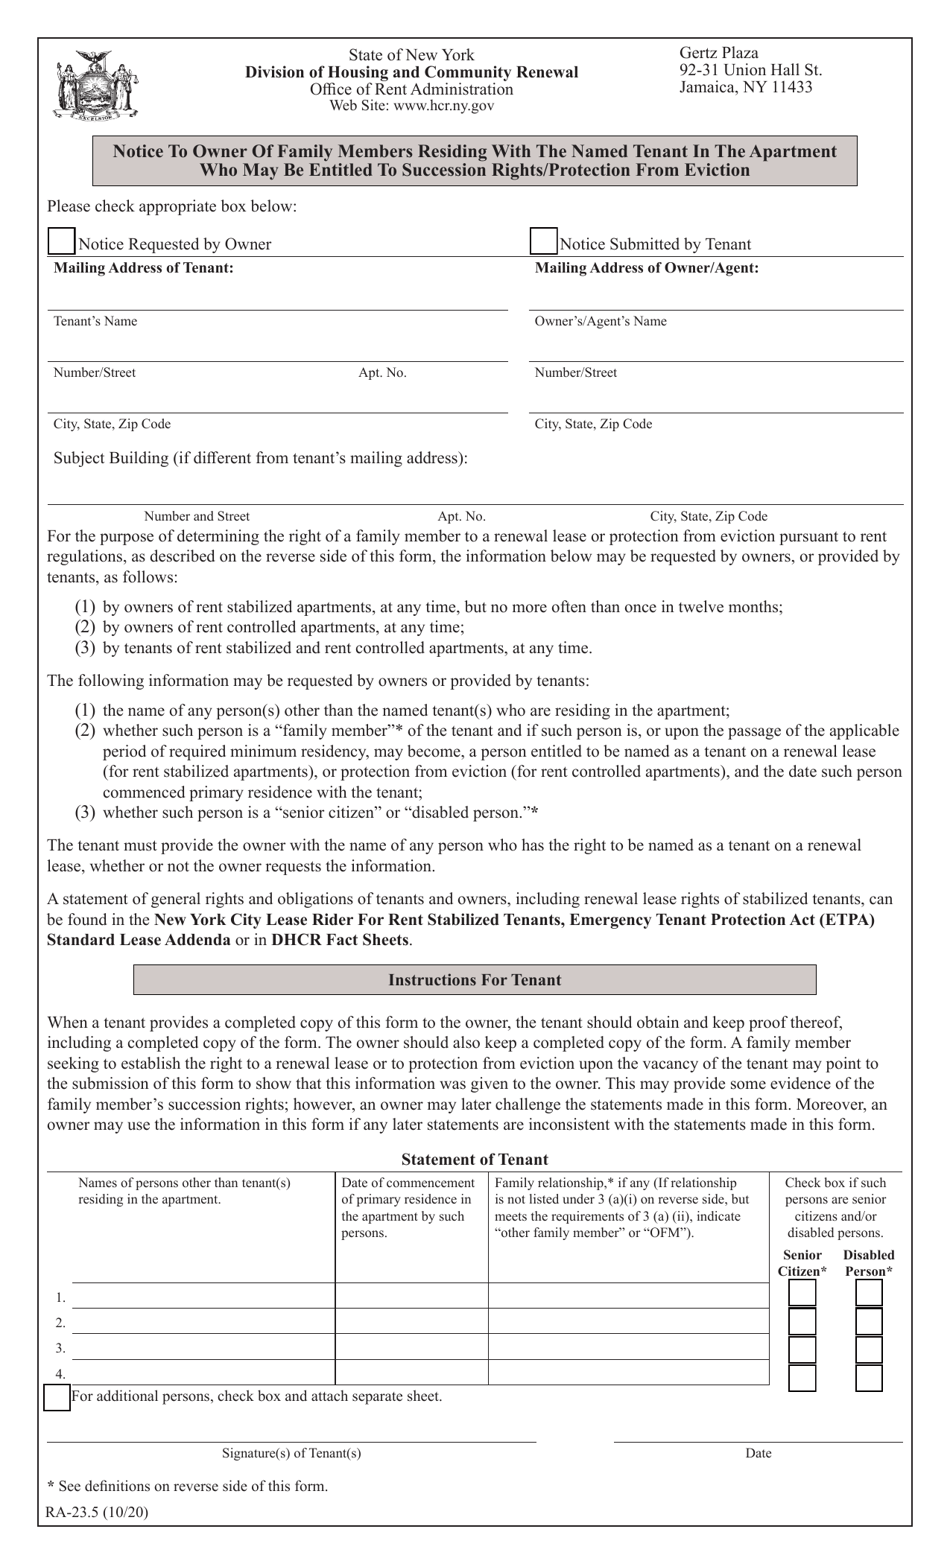 Form RA-23.5 Notice to Owner of Family Members Residing With the Named Tenant in the Apartment Who May Be Entitled to Succession Rights / Protection From Eviction - New York, Page 1